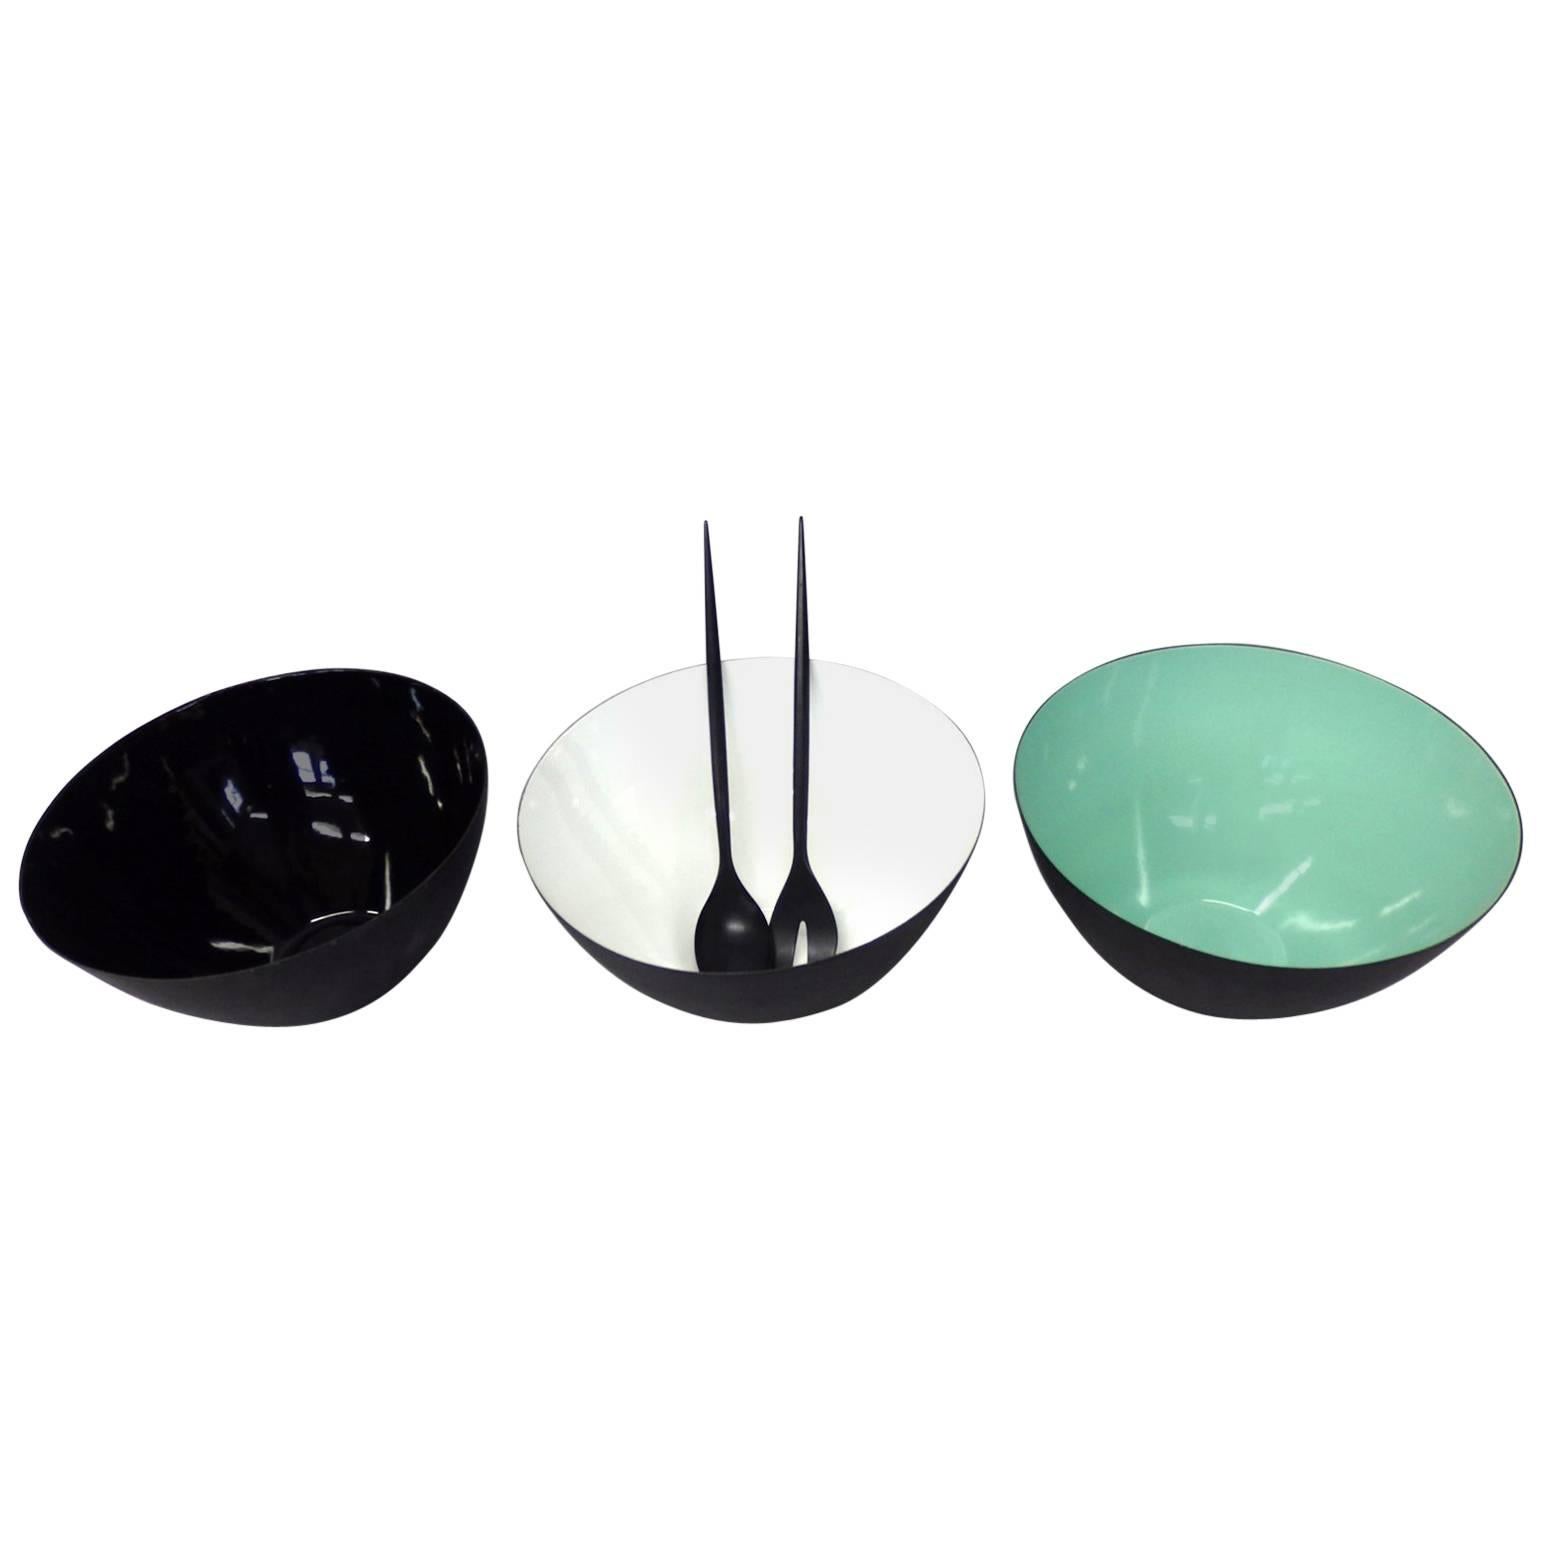 Three Steel with Enamel Krenit Ware Bowls with Salad Servers